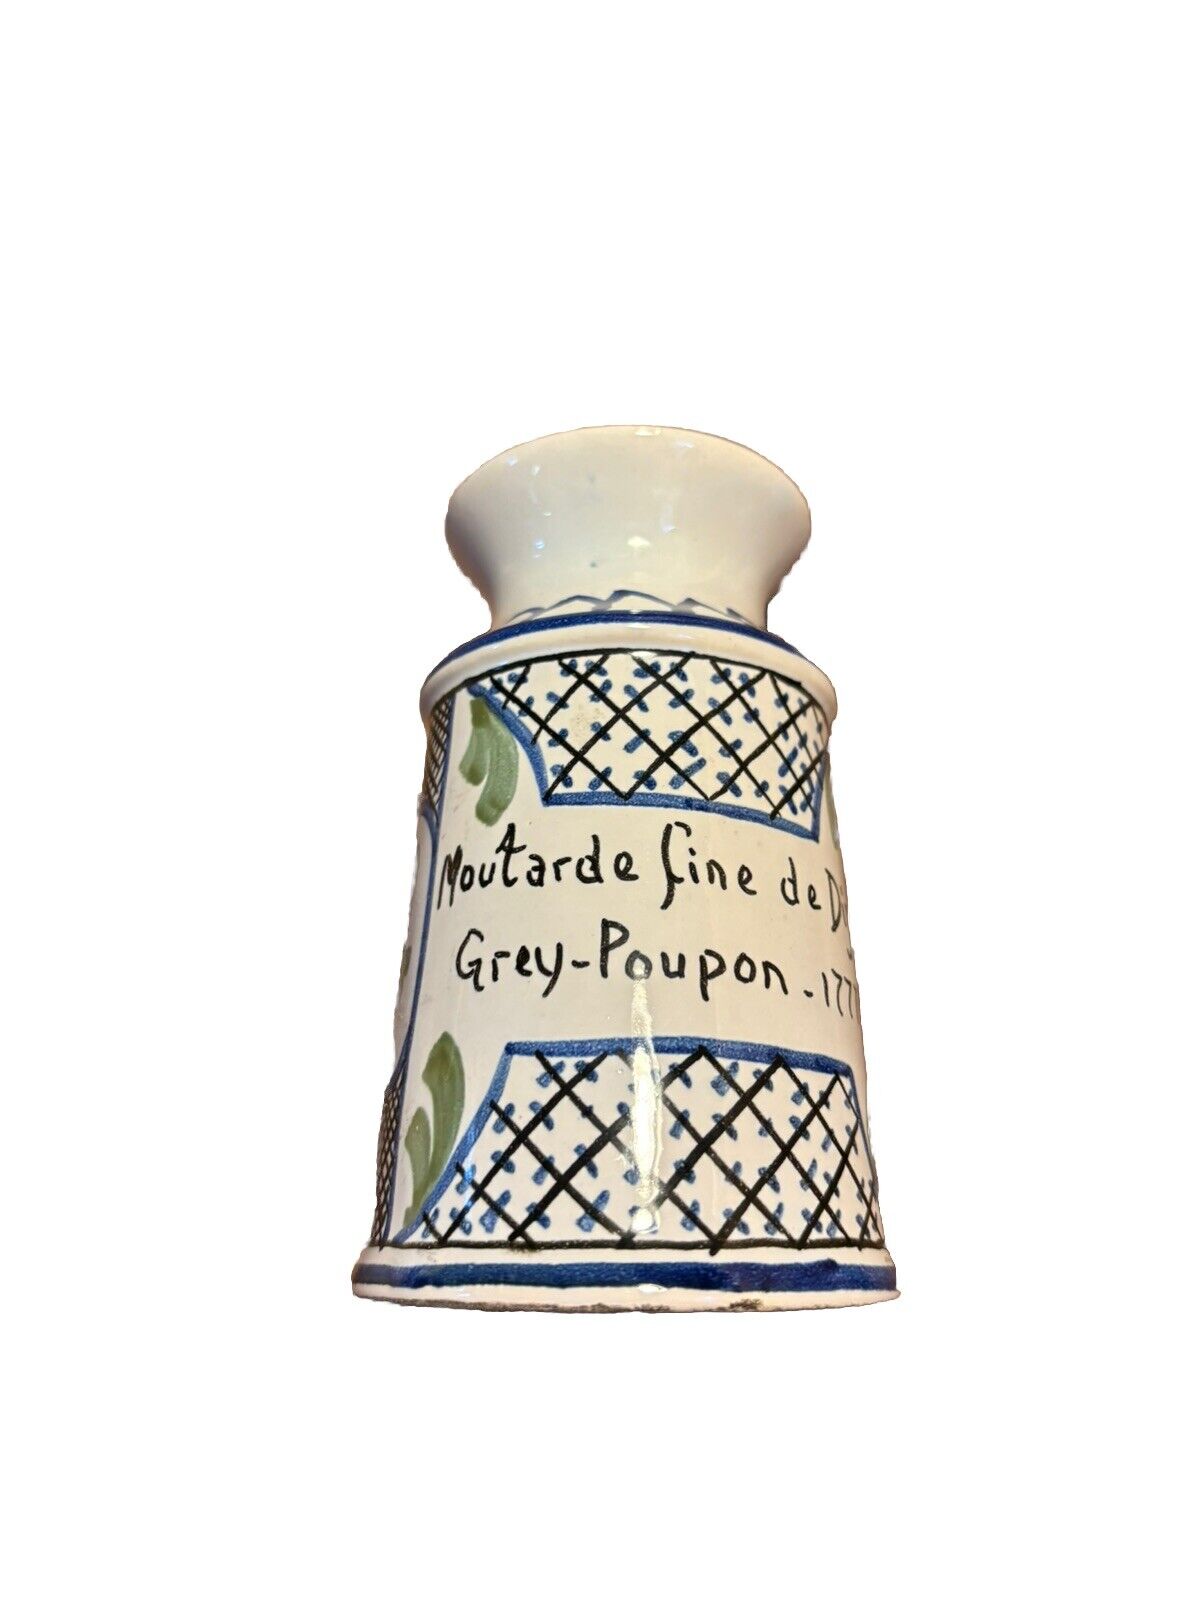 Vintage French Mustard Pot Hand Painted Made In France Grey Poupon 4.75“